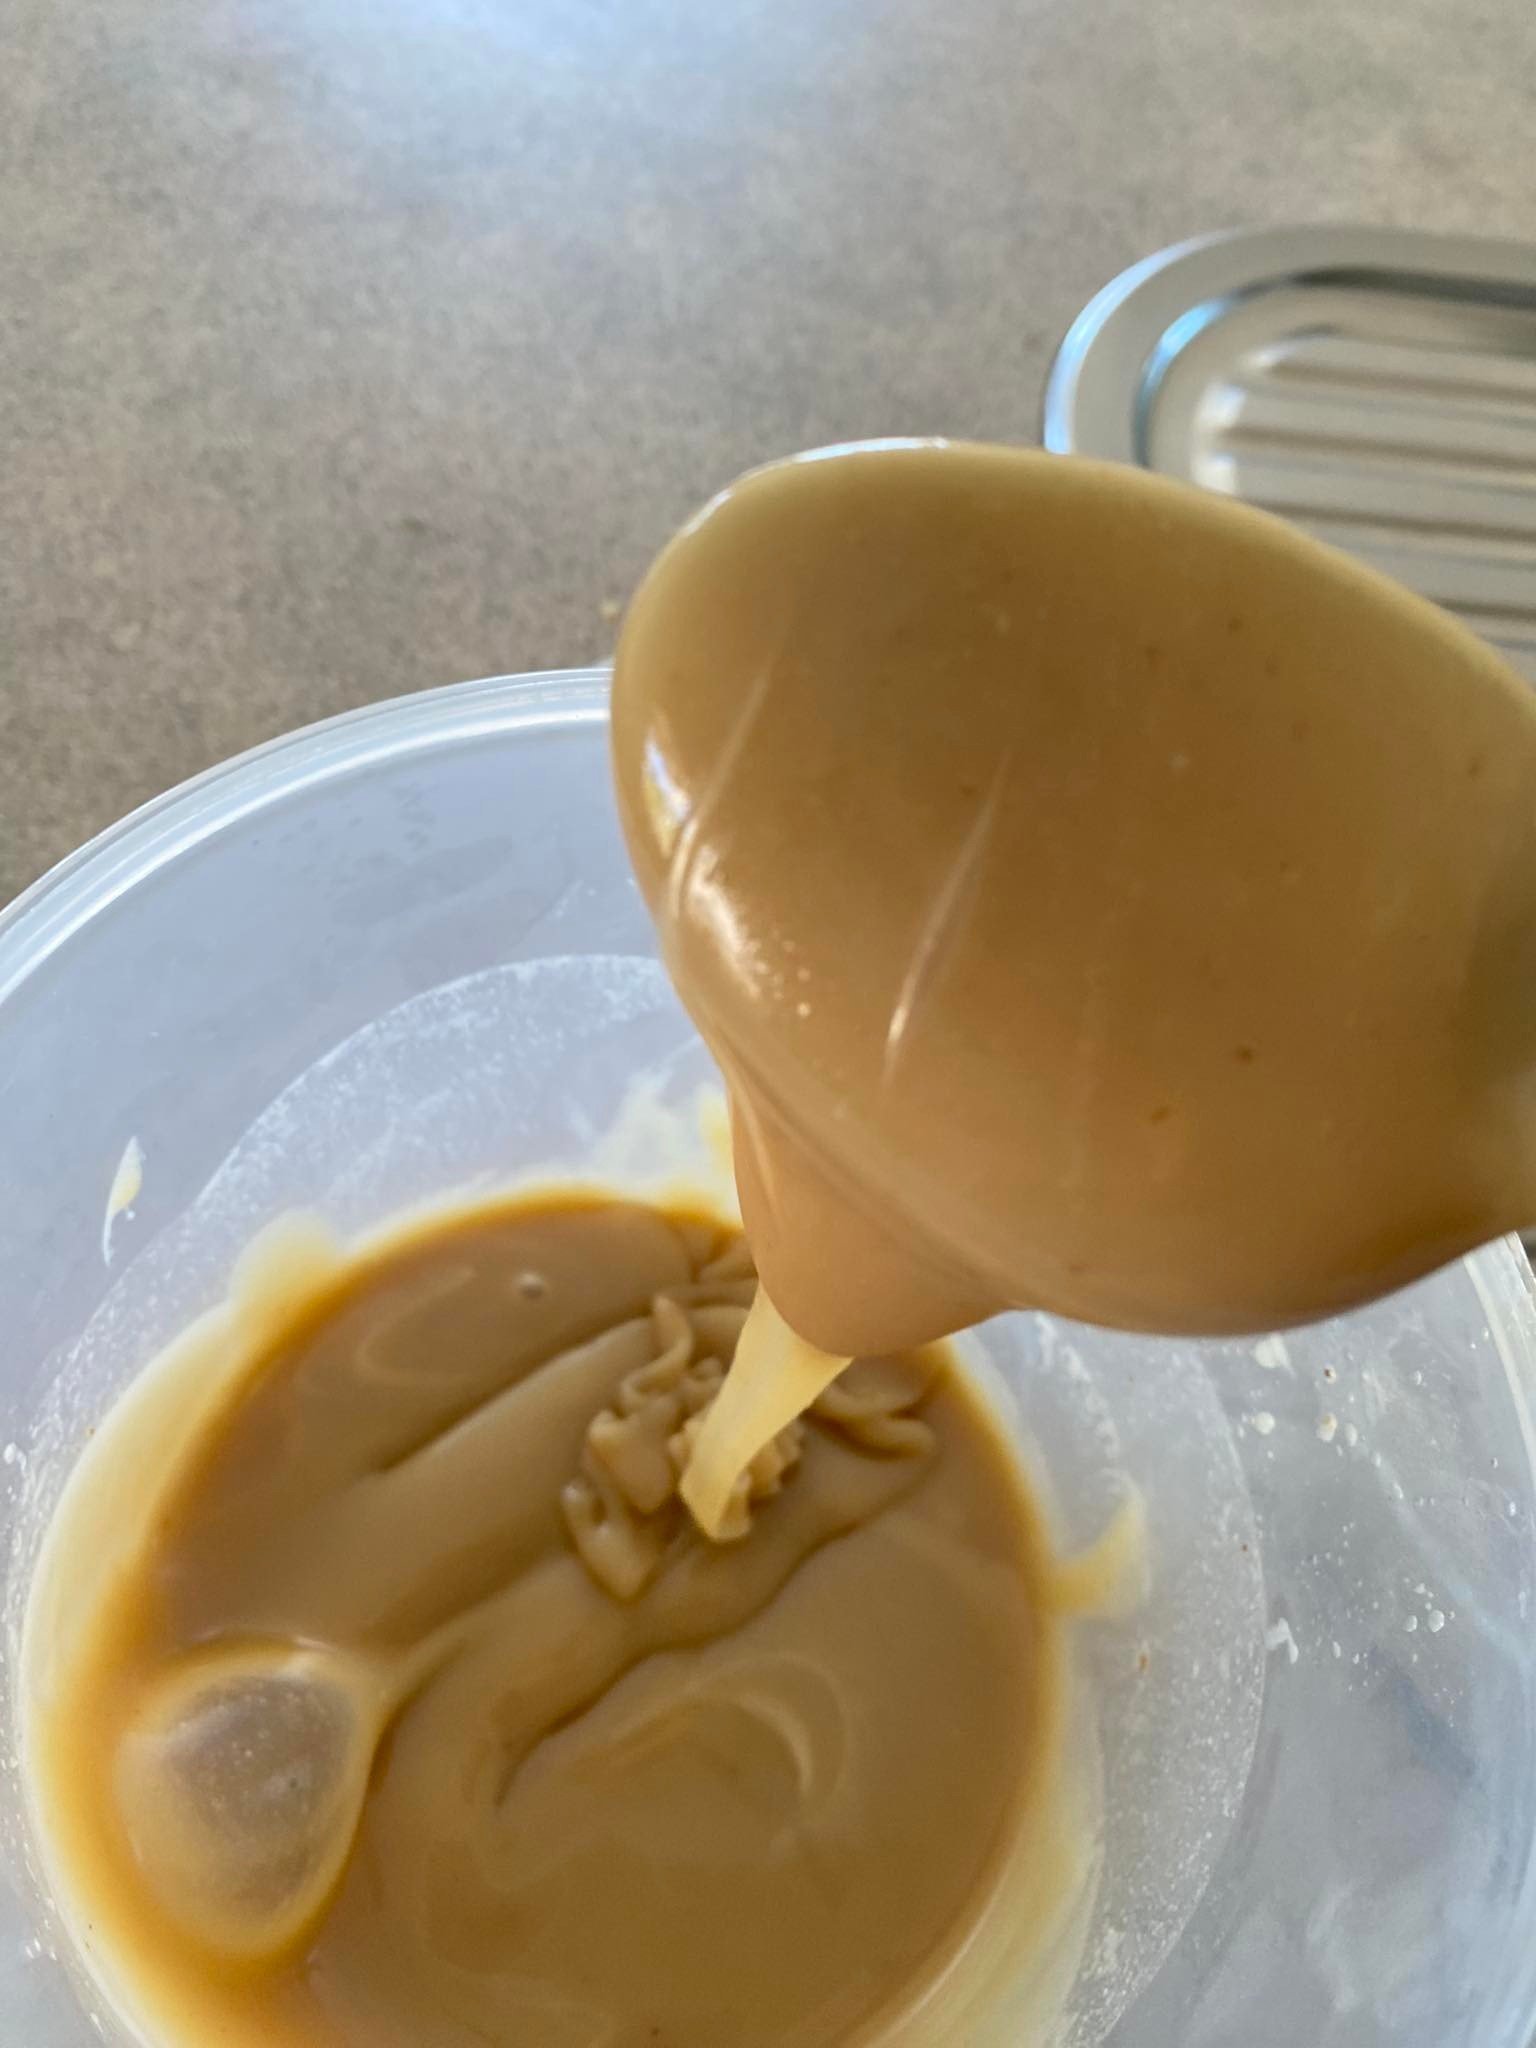 How To Make Thick Caramel Sauce without Cream